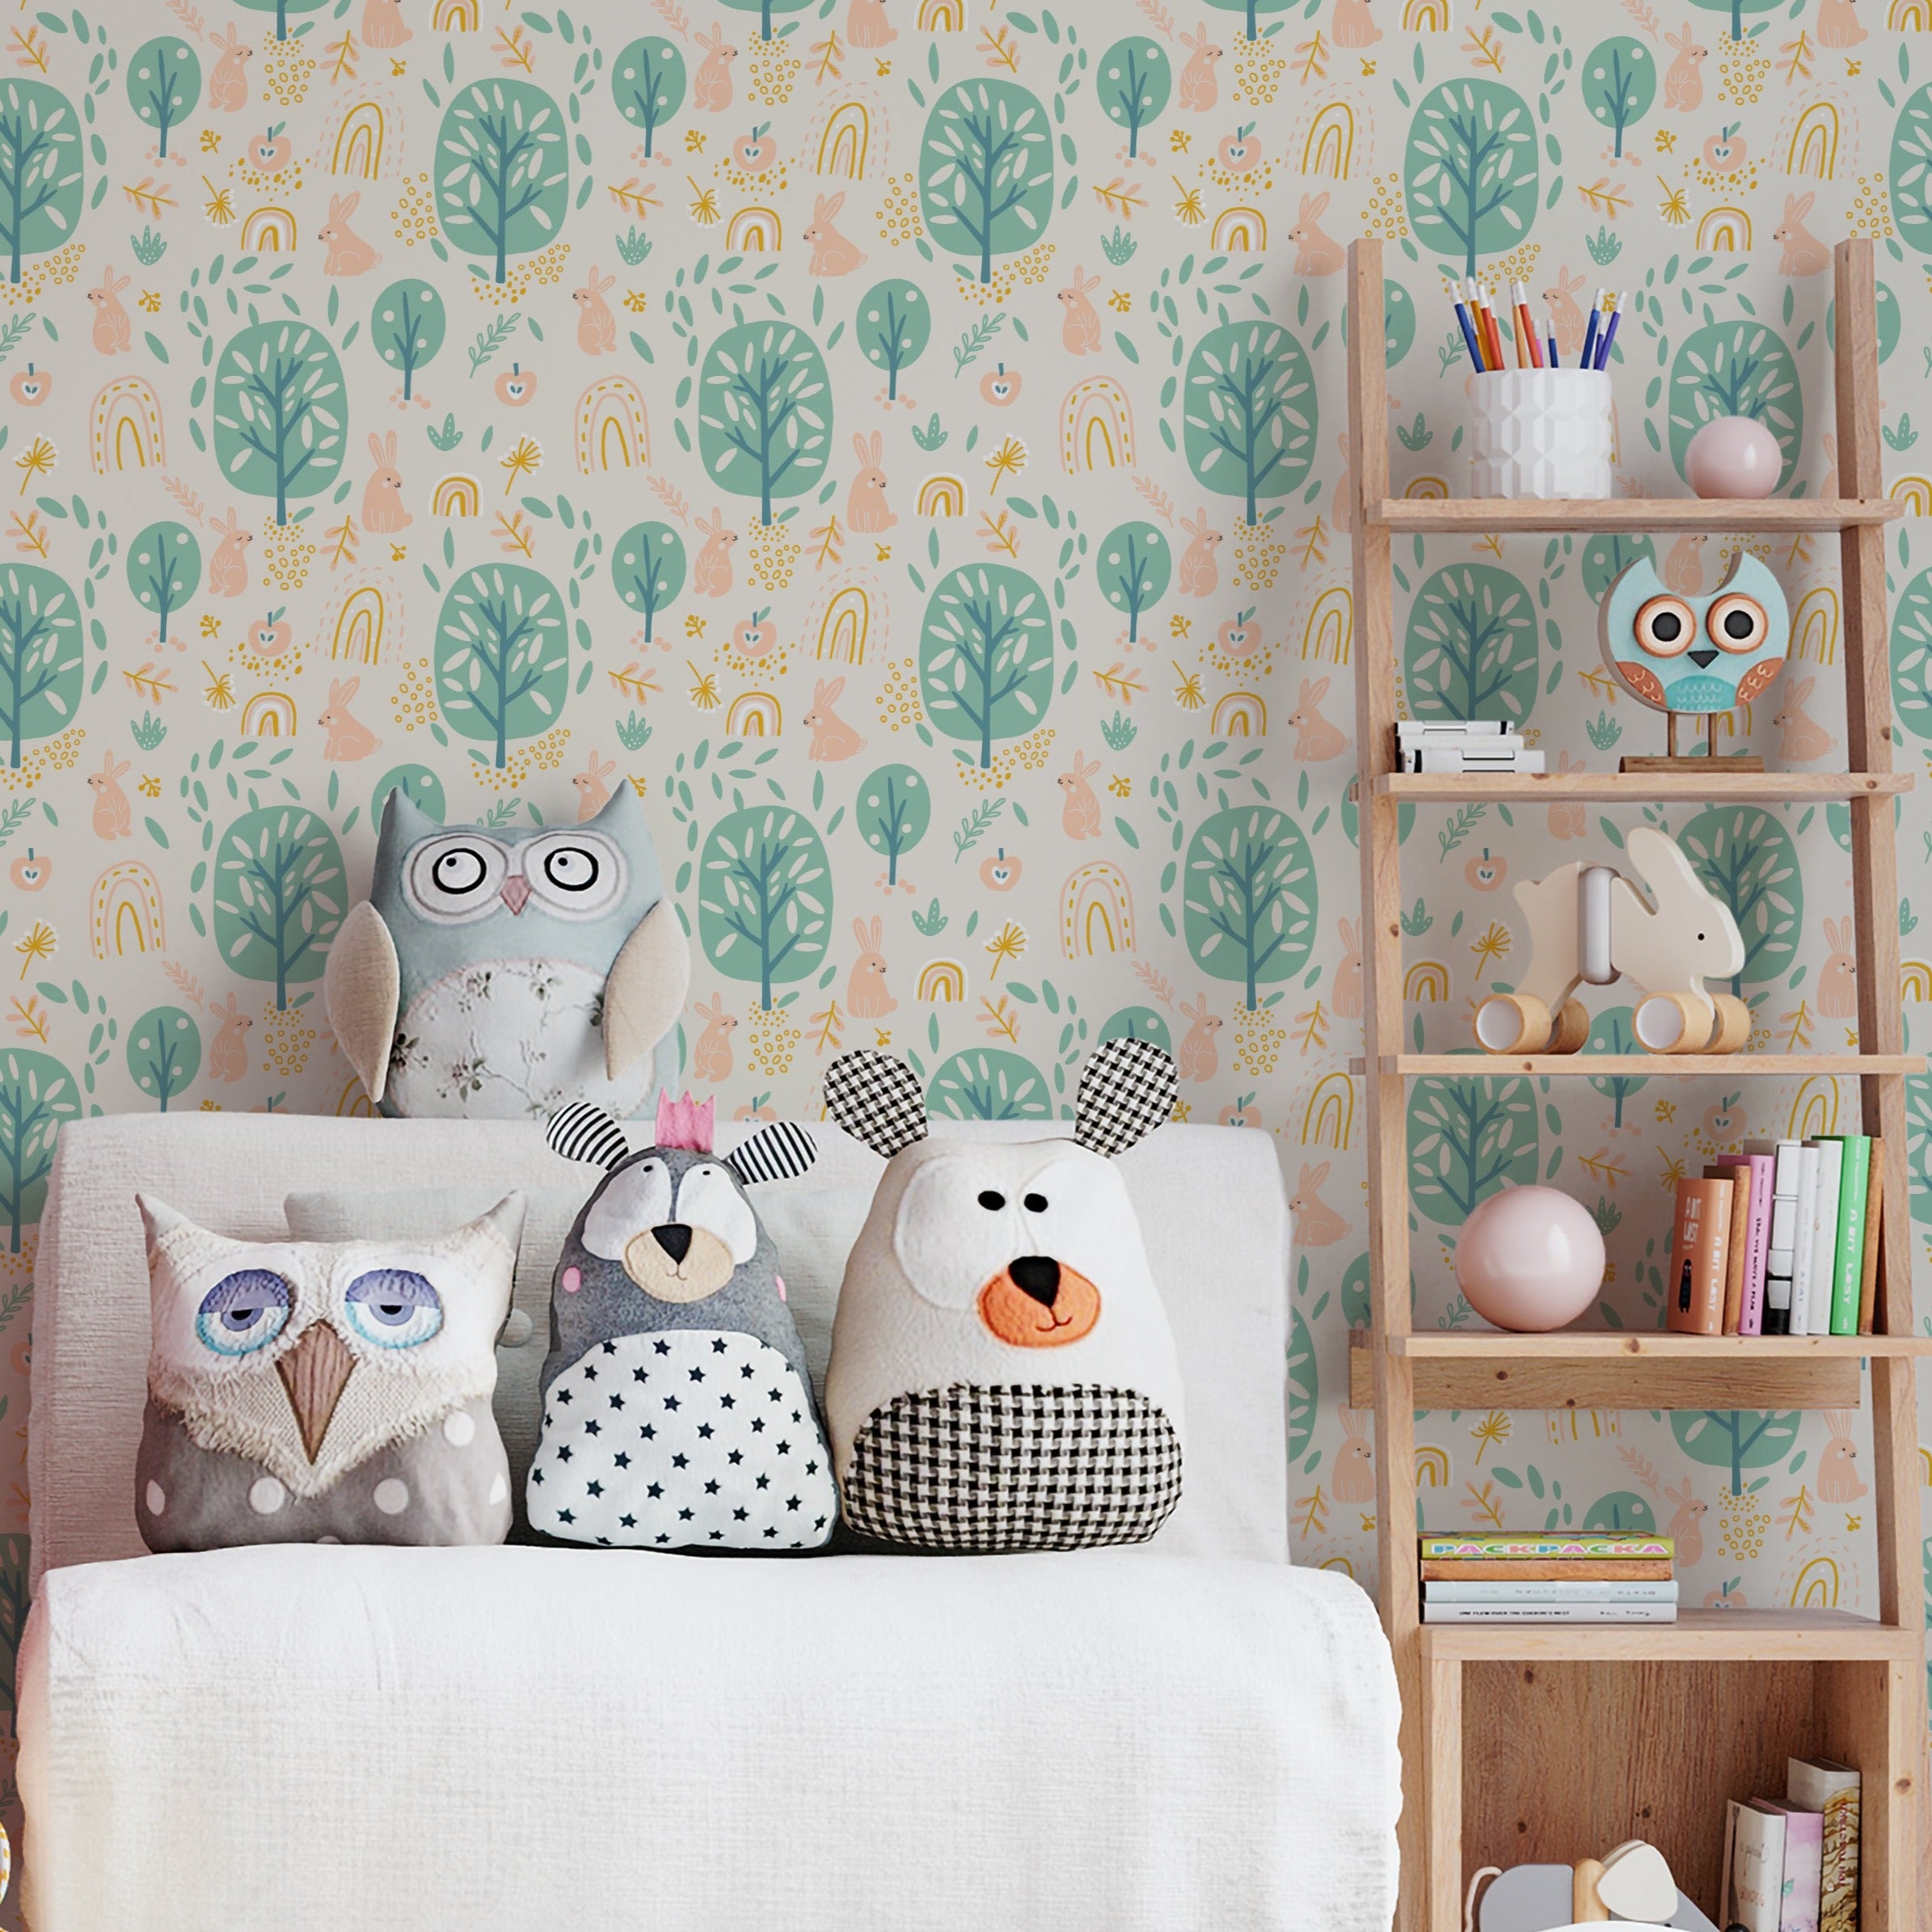 Children's playroom decorated with wallpaper featuring a soft peach background adorned with white rabbits, green trees, and subtle rainbow motifs, complemented by stuffed animal toys and wooden furniture.